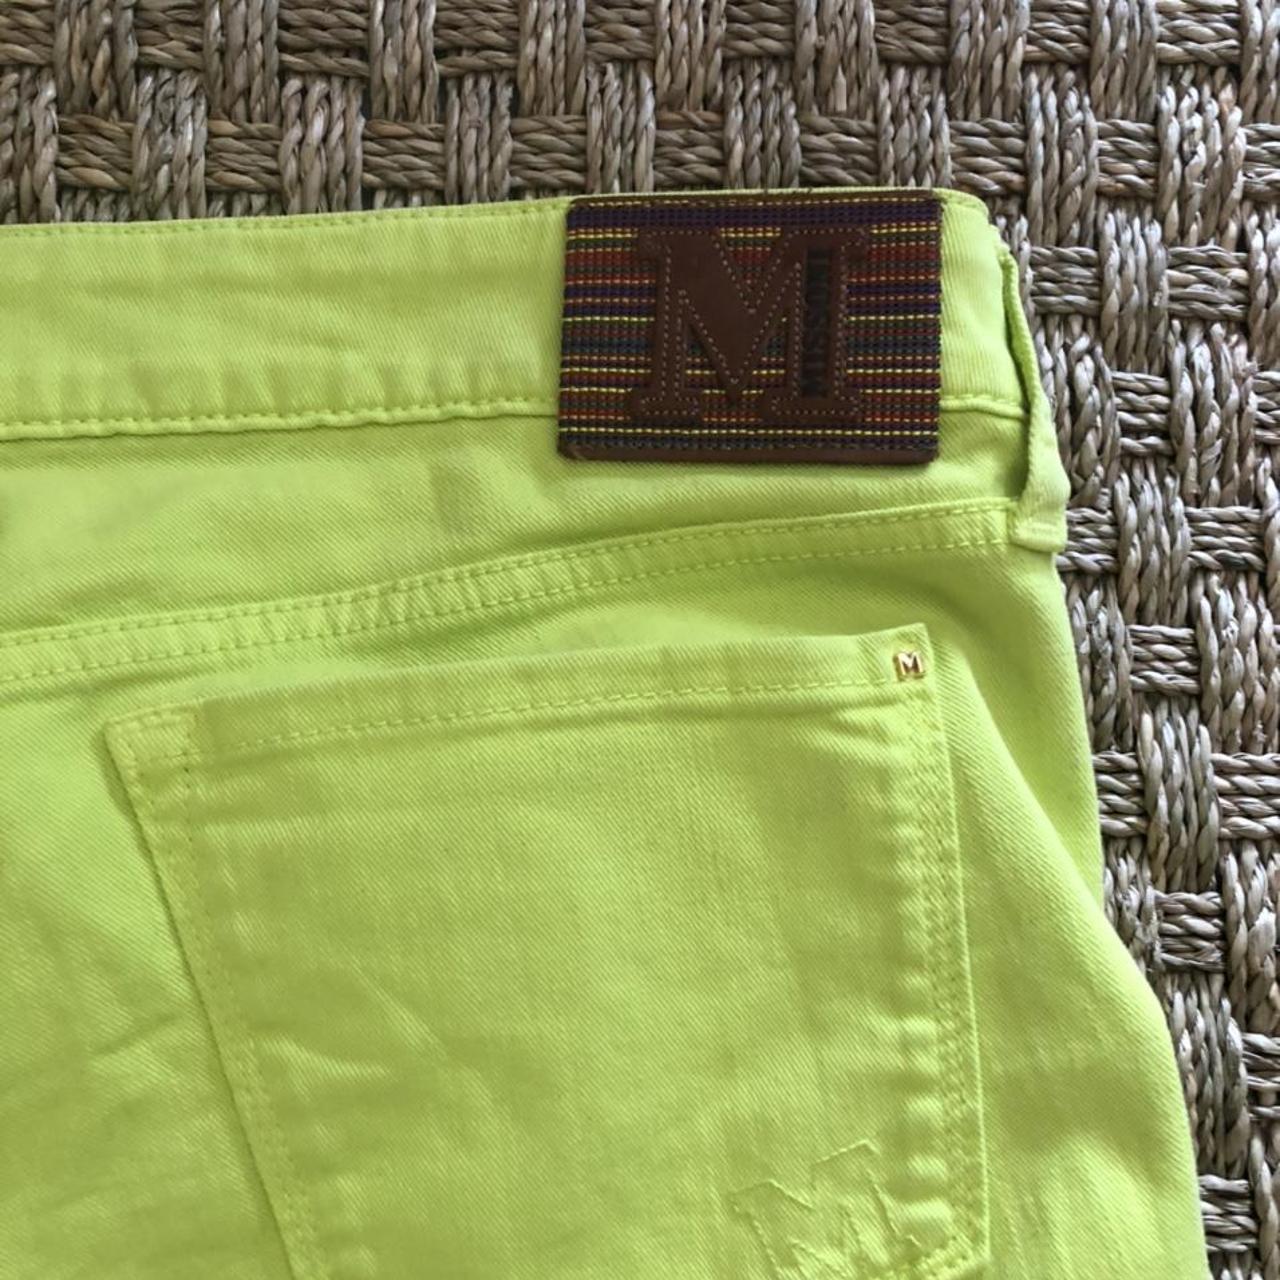 Missoni Women's Green and Gold Jeans (3)